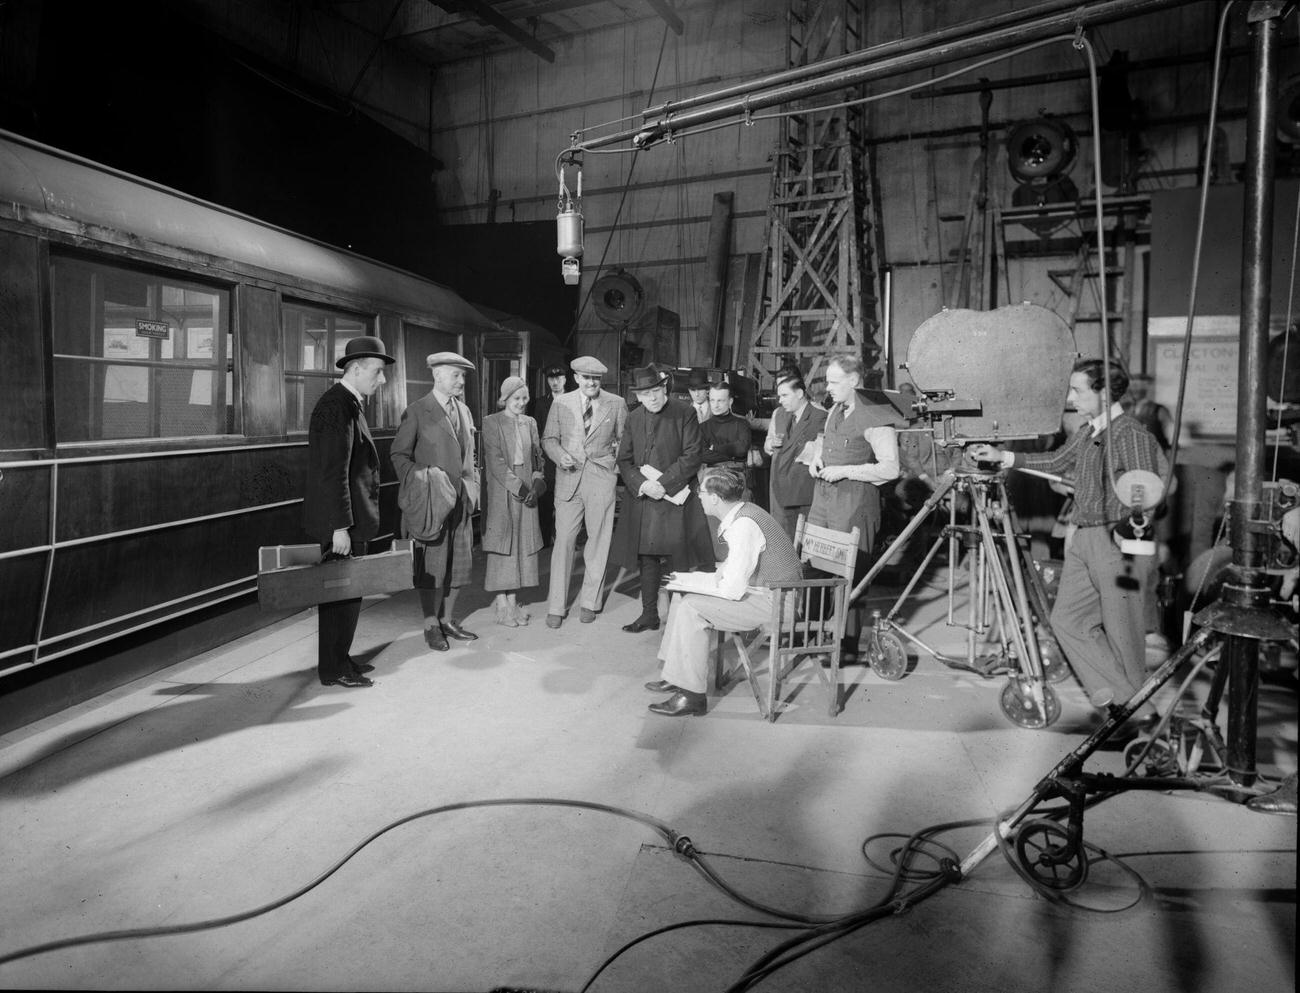 A film director giving instructions to his actors on a train